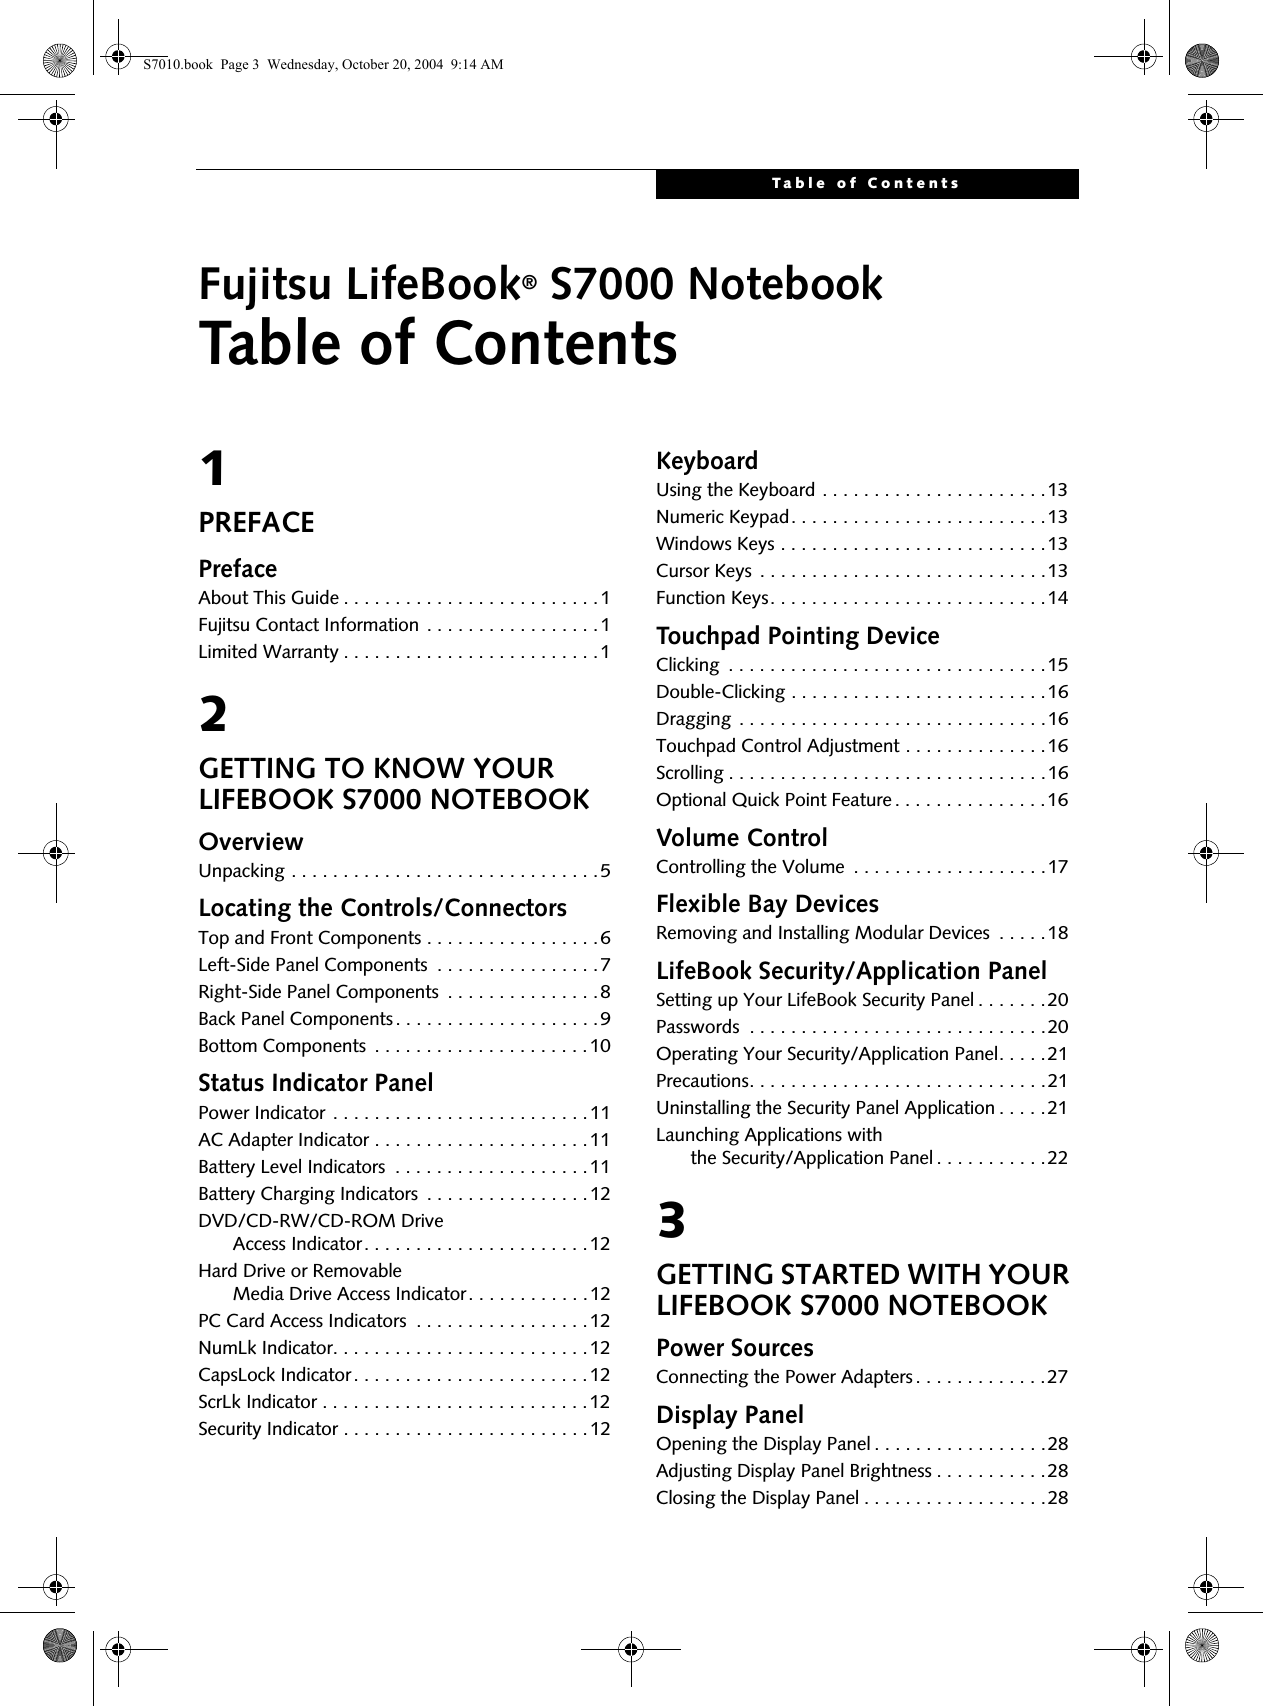 Table of ContentsFujitsu LifeBook® S7000 NotebookTable of Contents1PREFACEPrefaceAbout This Guide . . . . . . . . . . . . . . . . . . . . . . . . .1Fujitsu Contact Information . . . . . . . . . . . . . . . . .1Limited Warranty . . . . . . . . . . . . . . . . . . . . . . . . .12GETTING TO KNOW YOUR LIFEBOOK S7000 NOTEBOOK OverviewUnpacking . . . . . . . . . . . . . . . . . . . . . . . . . . . . . .5Locating the Controls/ConnectorsTop and Front Components . . . . . . . . . . . . . . . . .6Left-Side Panel Components  . . . . . . . . . . . . . . . .7Right-Side Panel Components  . . . . . . . . . . . . . . .8Back Panel Components. . . . . . . . . . . . . . . . . . . .9Bottom Components  . . . . . . . . . . . . . . . . . . . . .10Status Indicator PanelPower Indicator . . . . . . . . . . . . . . . . . . . . . . . . .11AC Adapter Indicator . . . . . . . . . . . . . . . . . . . . .11Battery Level Indicators  . . . . . . . . . . . . . . . . . . .11Battery Charging Indicators  . . . . . . . . . . . . . . . .12DVD/CD-RW/CD-ROM Drive     Access Indicator. . . . . . . . . . . . . . . . . . . . . .12Hard Drive or Removable     Media Drive Access Indicator. . . . . . . . . . . .12PC Card Access Indicators  . . . . . . . . . . . . . . . . .12NumLk Indicator. . . . . . . . . . . . . . . . . . . . . . . . .12CapsLock Indicator. . . . . . . . . . . . . . . . . . . . . . .12ScrLk Indicator . . . . . . . . . . . . . . . . . . . . . . . . . .12Security Indicator . . . . . . . . . . . . . . . . . . . . . . . .12KeyboardUsing the Keyboard . . . . . . . . . . . . . . . . . . . . . .13Numeric Keypad. . . . . . . . . . . . . . . . . . . . . . . . .13Windows Keys . . . . . . . . . . . . . . . . . . . . . . . . . .13Cursor Keys  . . . . . . . . . . . . . . . . . . . . . . . . . . . .13Function Keys. . . . . . . . . . . . . . . . . . . . . . . . . . .14Touchpad Pointing DeviceClicking  . . . . . . . . . . . . . . . . . . . . . . . . . . . . . . .15Double-Clicking . . . . . . . . . . . . . . . . . . . . . . . . .16Dragging  . . . . . . . . . . . . . . . . . . . . . . . . . . . . . .16Touchpad Control Adjustment . . . . . . . . . . . . . .16Scrolling . . . . . . . . . . . . . . . . . . . . . . . . . . . . . . .16Optional Quick Point Feature . . . . . . . . . . . . . . .16Volume ControlControlling the Volume  . . . . . . . . . . . . . . . . . . .17Flexible Bay DevicesRemoving and Installing Modular Devices  . . . . .18LifeBook Security/Application PanelSetting up Your LifeBook Security Panel . . . . . . .20Passwords  . . . . . . . . . . . . . . . . . . . . . . . . . . . . .20Operating Your Security/Application Panel. . . . .21Precautions. . . . . . . . . . . . . . . . . . . . . . . . . . . . .21Uninstalling the Security Panel Application . . . . .21Launching Applications with     the Security/Application Panel . . . . . . . . . . .223GETTING STARTED WITH YOUR LIFEBOOK S7000 NOTEBOOKPower SourcesConnecting the Power Adapters . . . . . . . . . . . . .27Display PanelOpening the Display Panel . . . . . . . . . . . . . . . . .28Adjusting Display Panel Brightness . . . . . . . . . . .28Closing the Display Panel . . . . . . . . . . . . . . . . . .28S7010.book  Page 3  Wednesday, October 20, 2004  9:14 AM